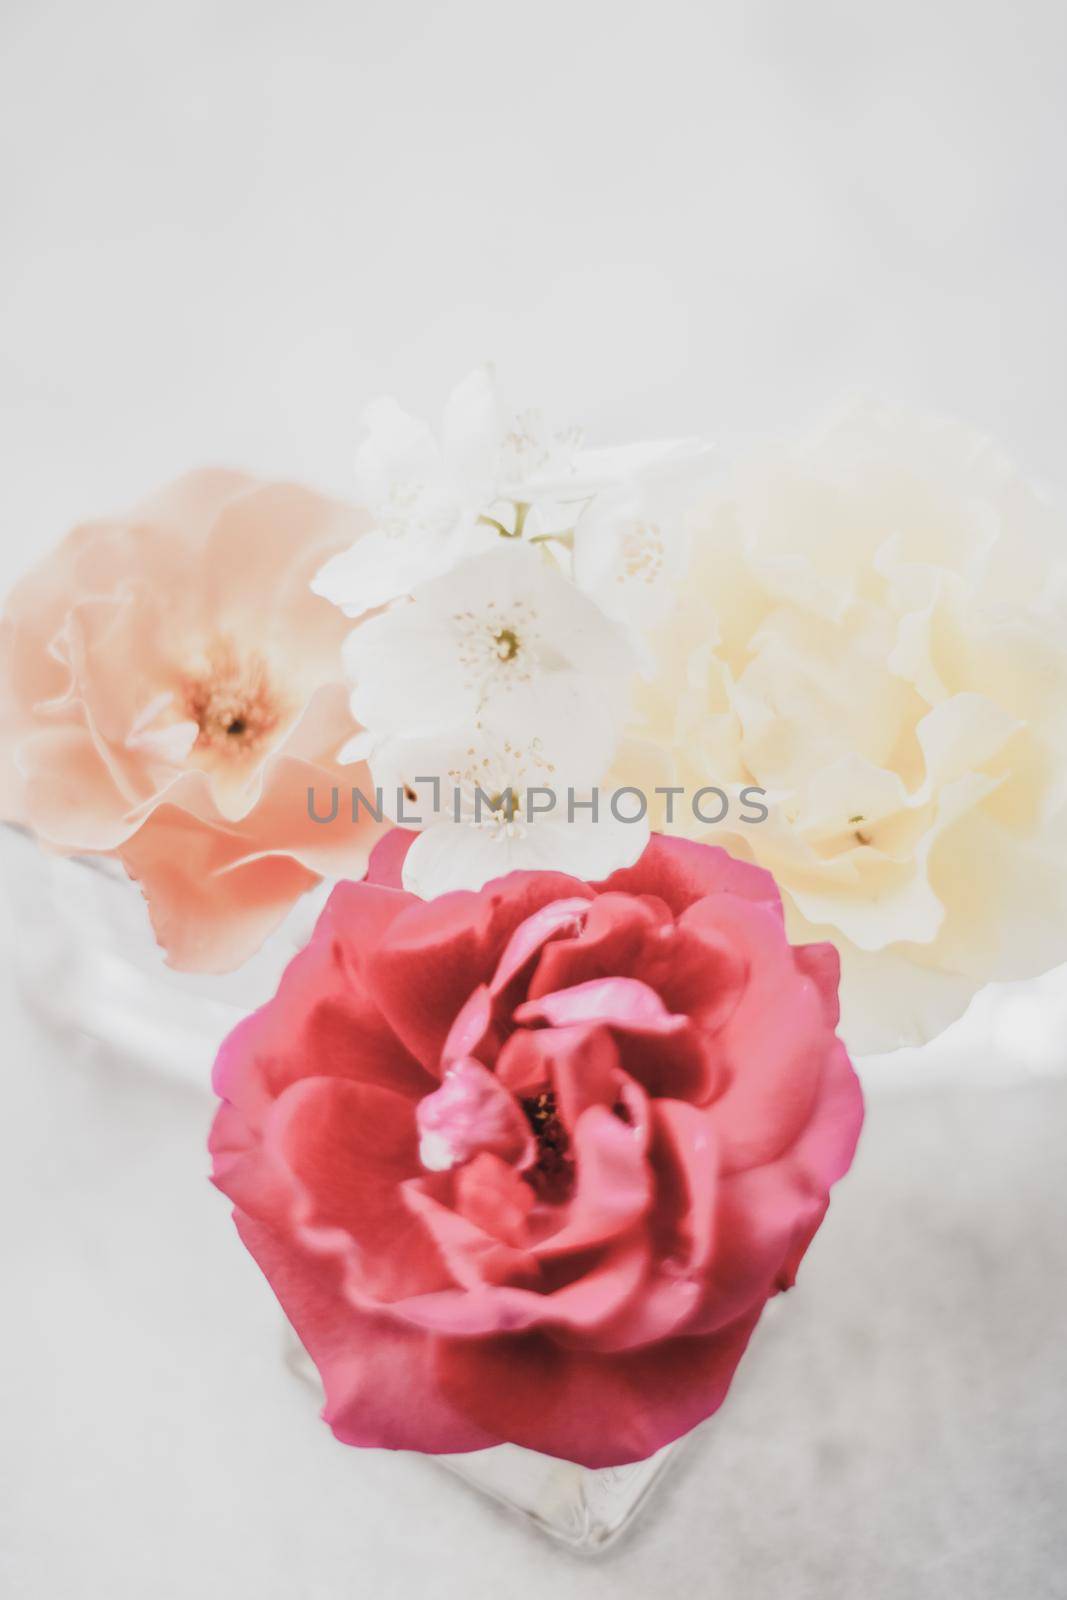 Wedding decor, floral background and beautiful home garden concept - Vintage roses on marble